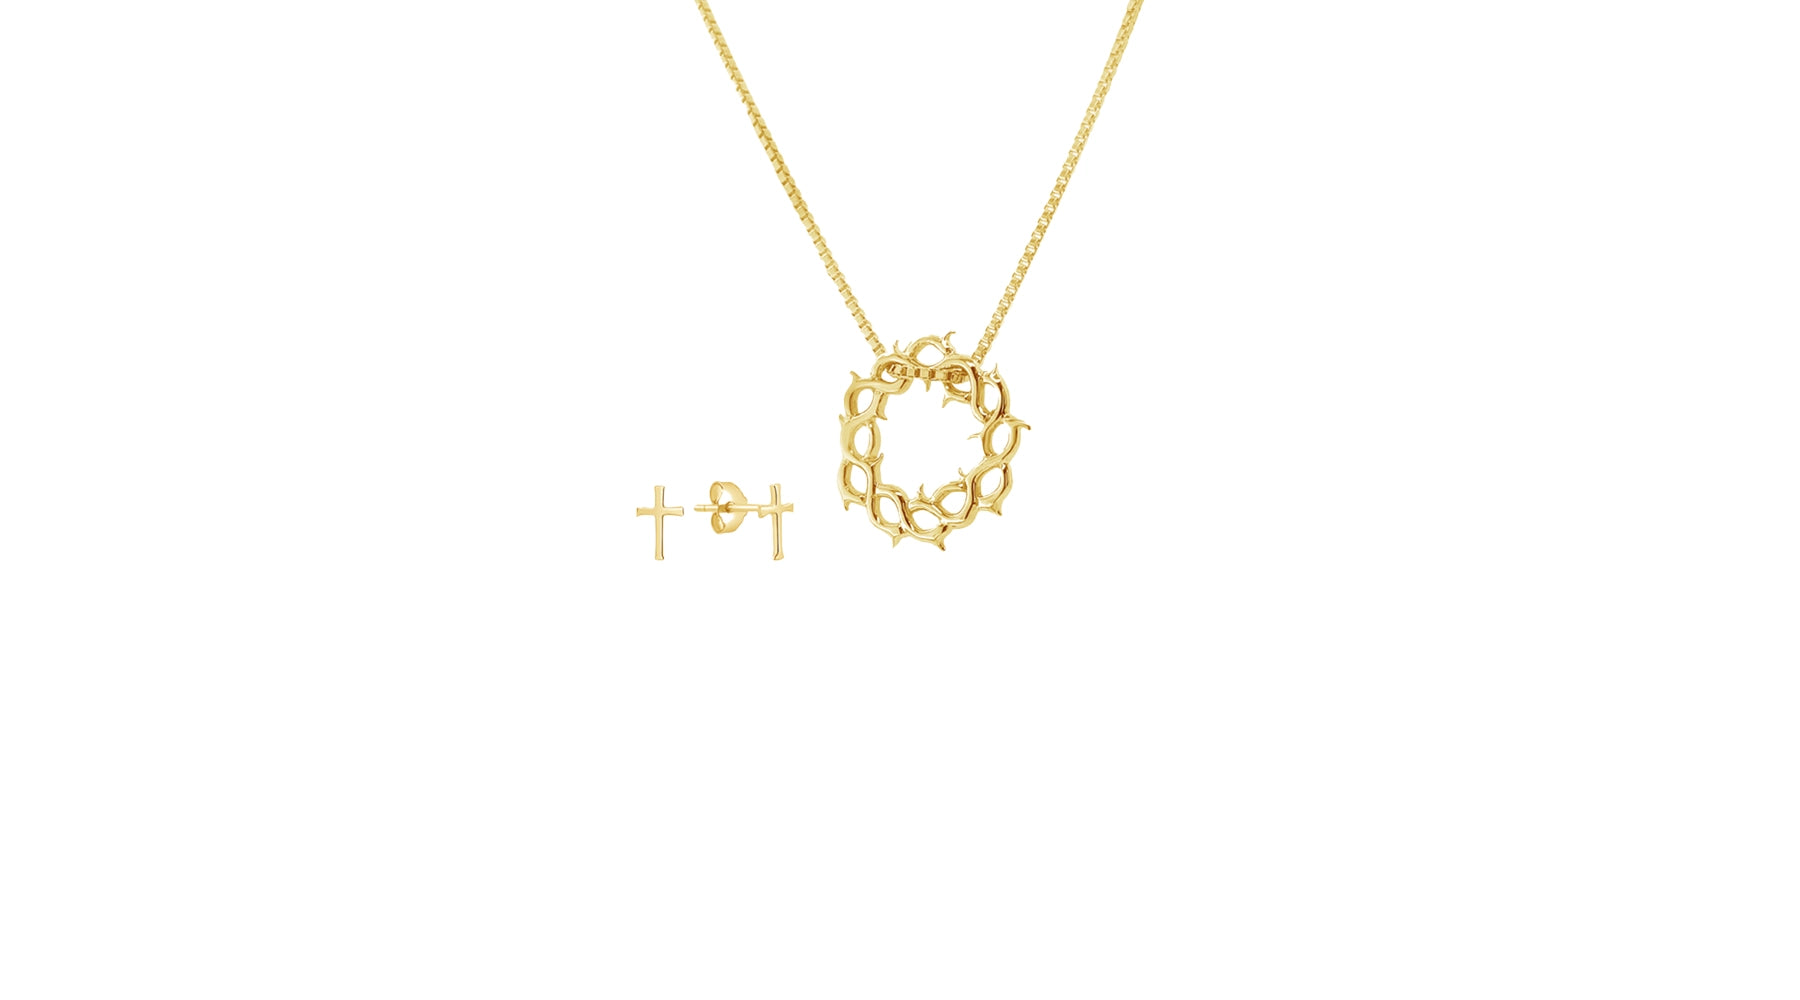 18kt gold vermeil crown of thorns necklace with small gold vermeil cross stud earrings